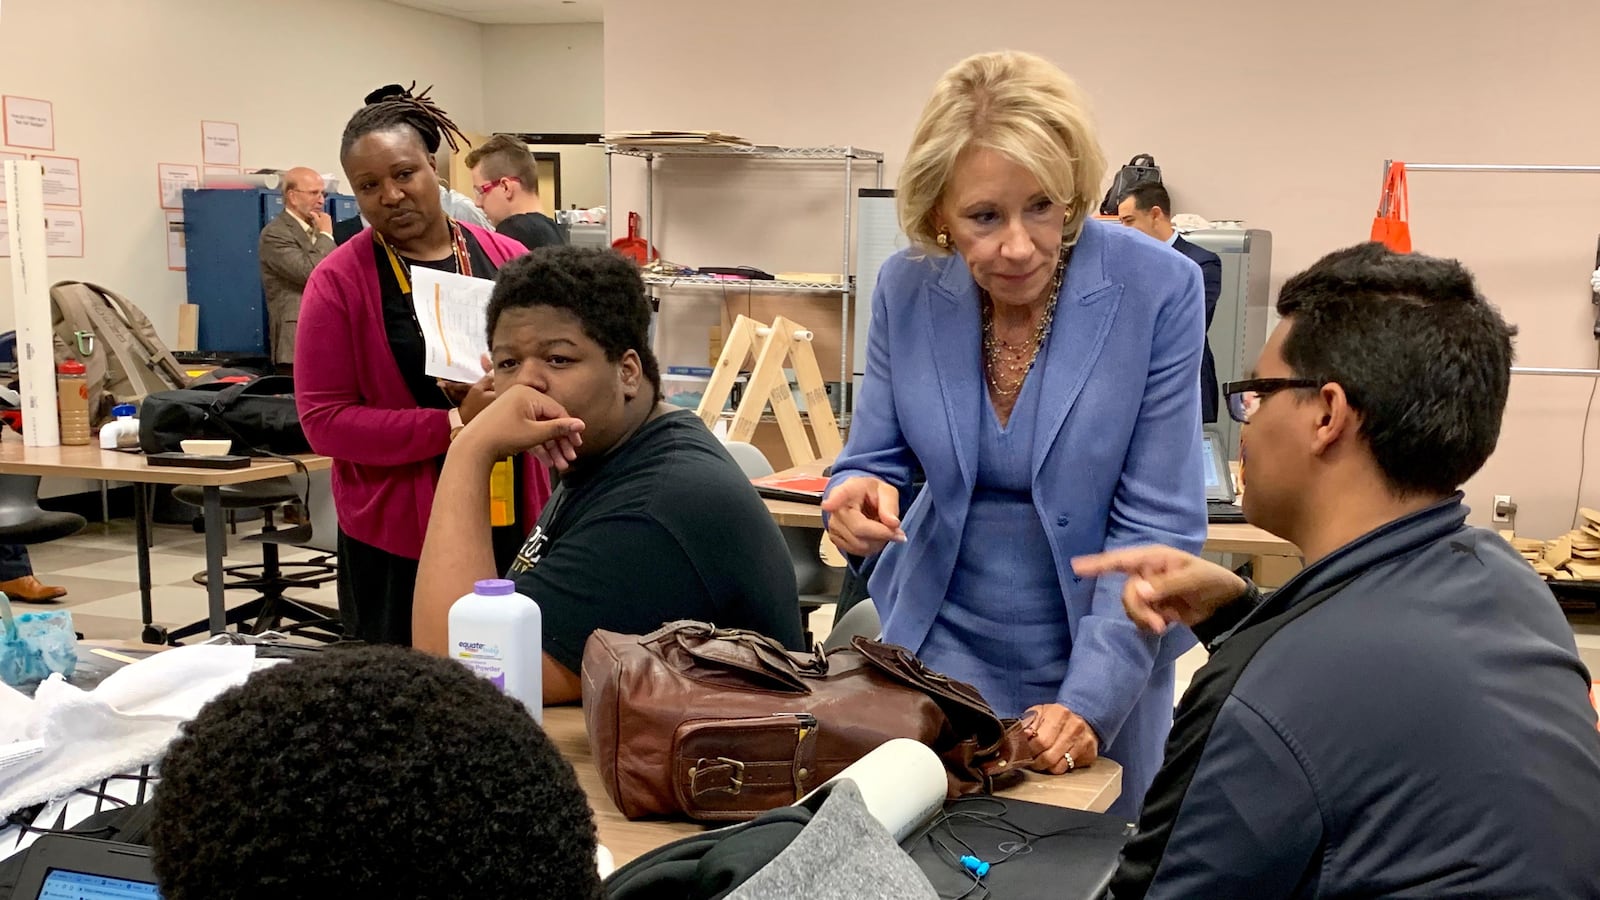 U.S. Secretary of Education Betsy DeVos talks to students at Purdue Polytechnic High School in Indianapolis on Sept. 17, 2019.